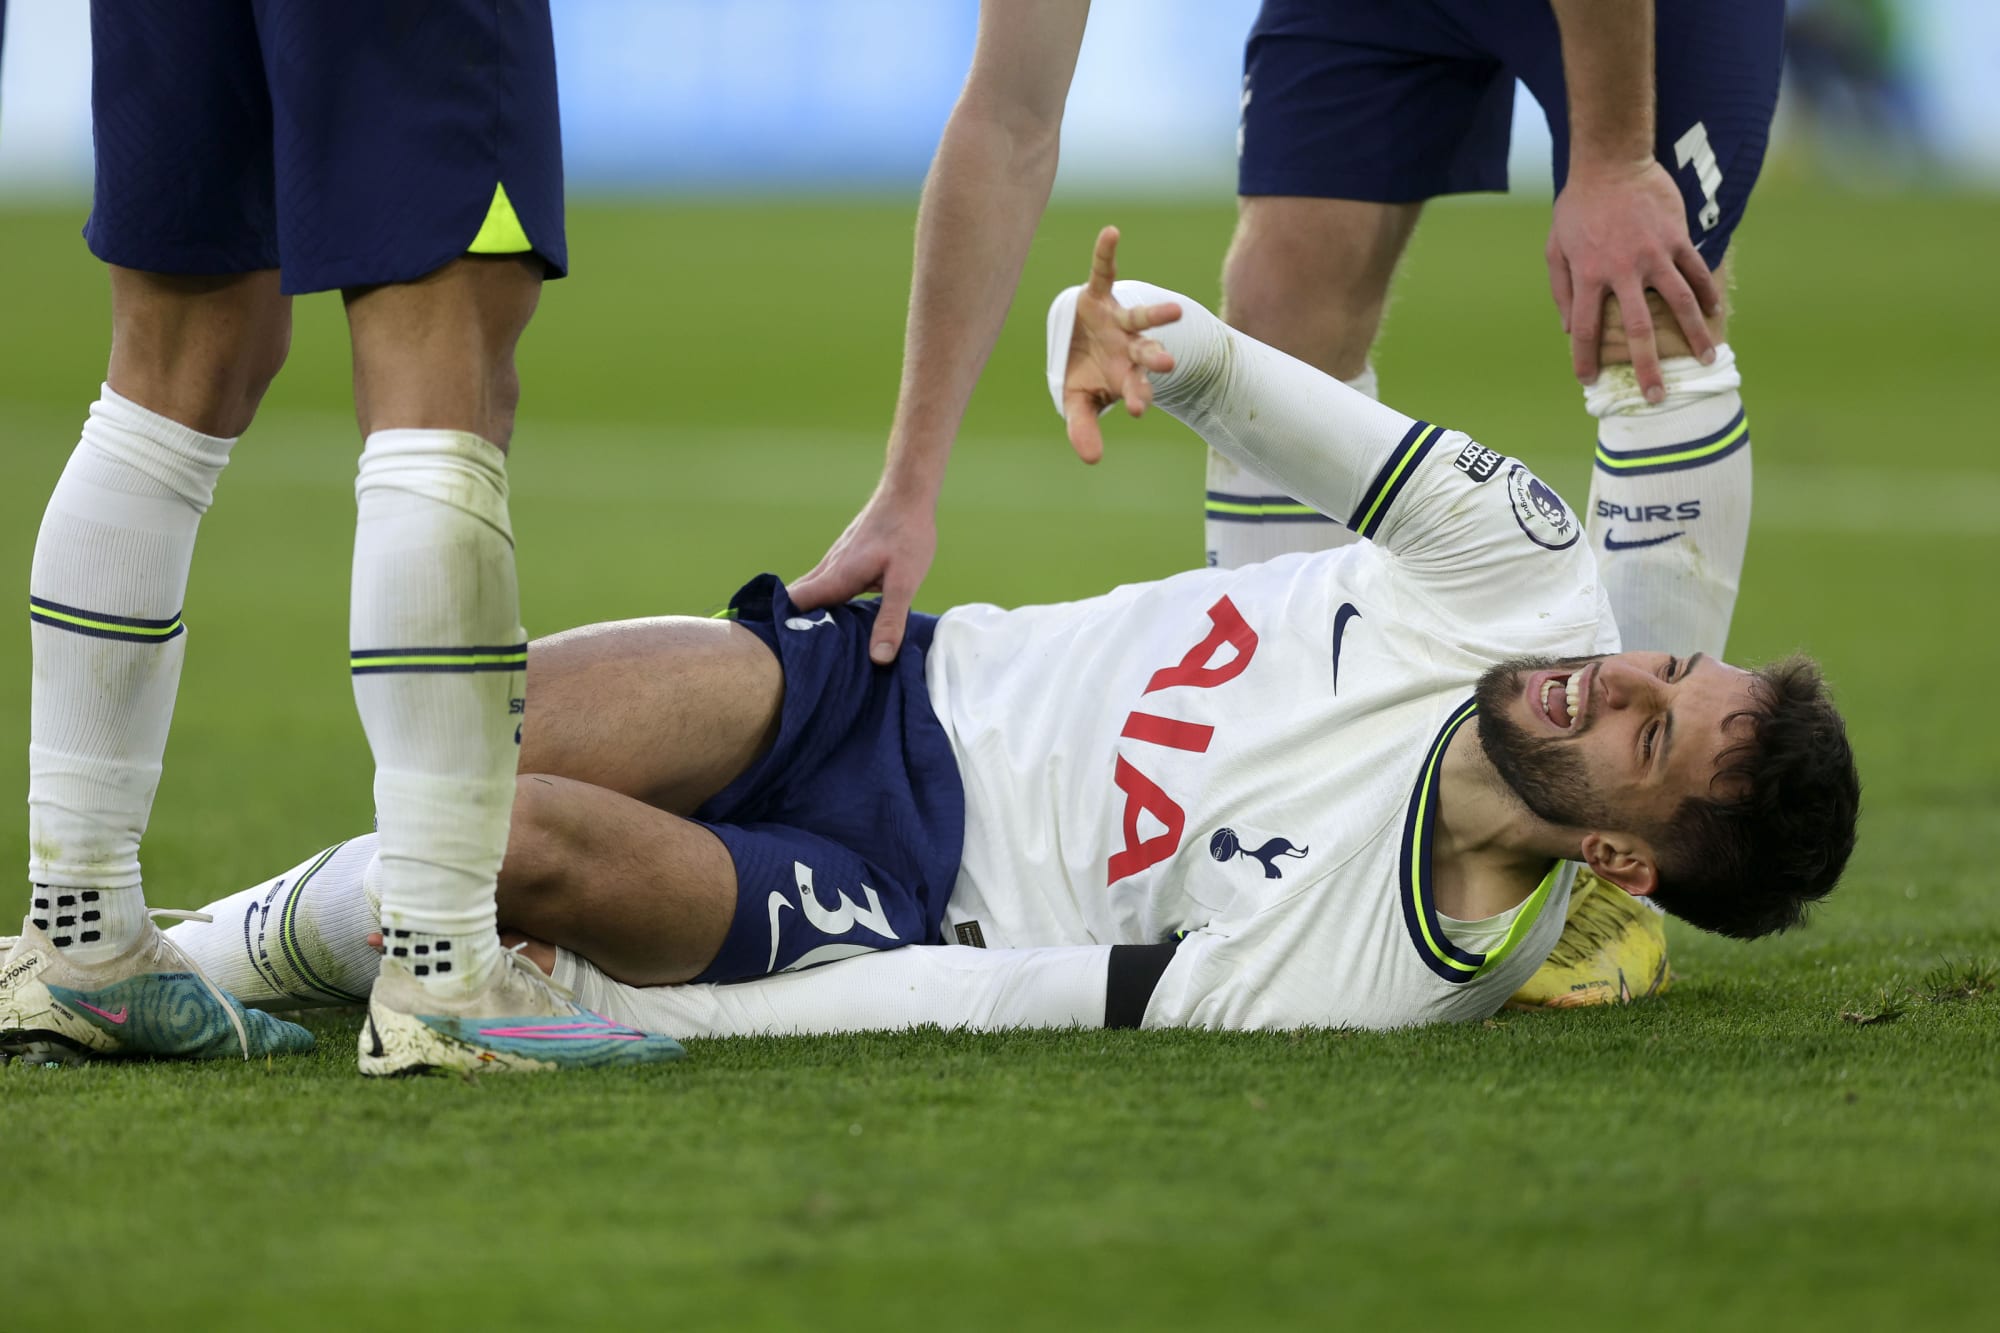 Life particularly miserable at Tottenham without long-term absentee